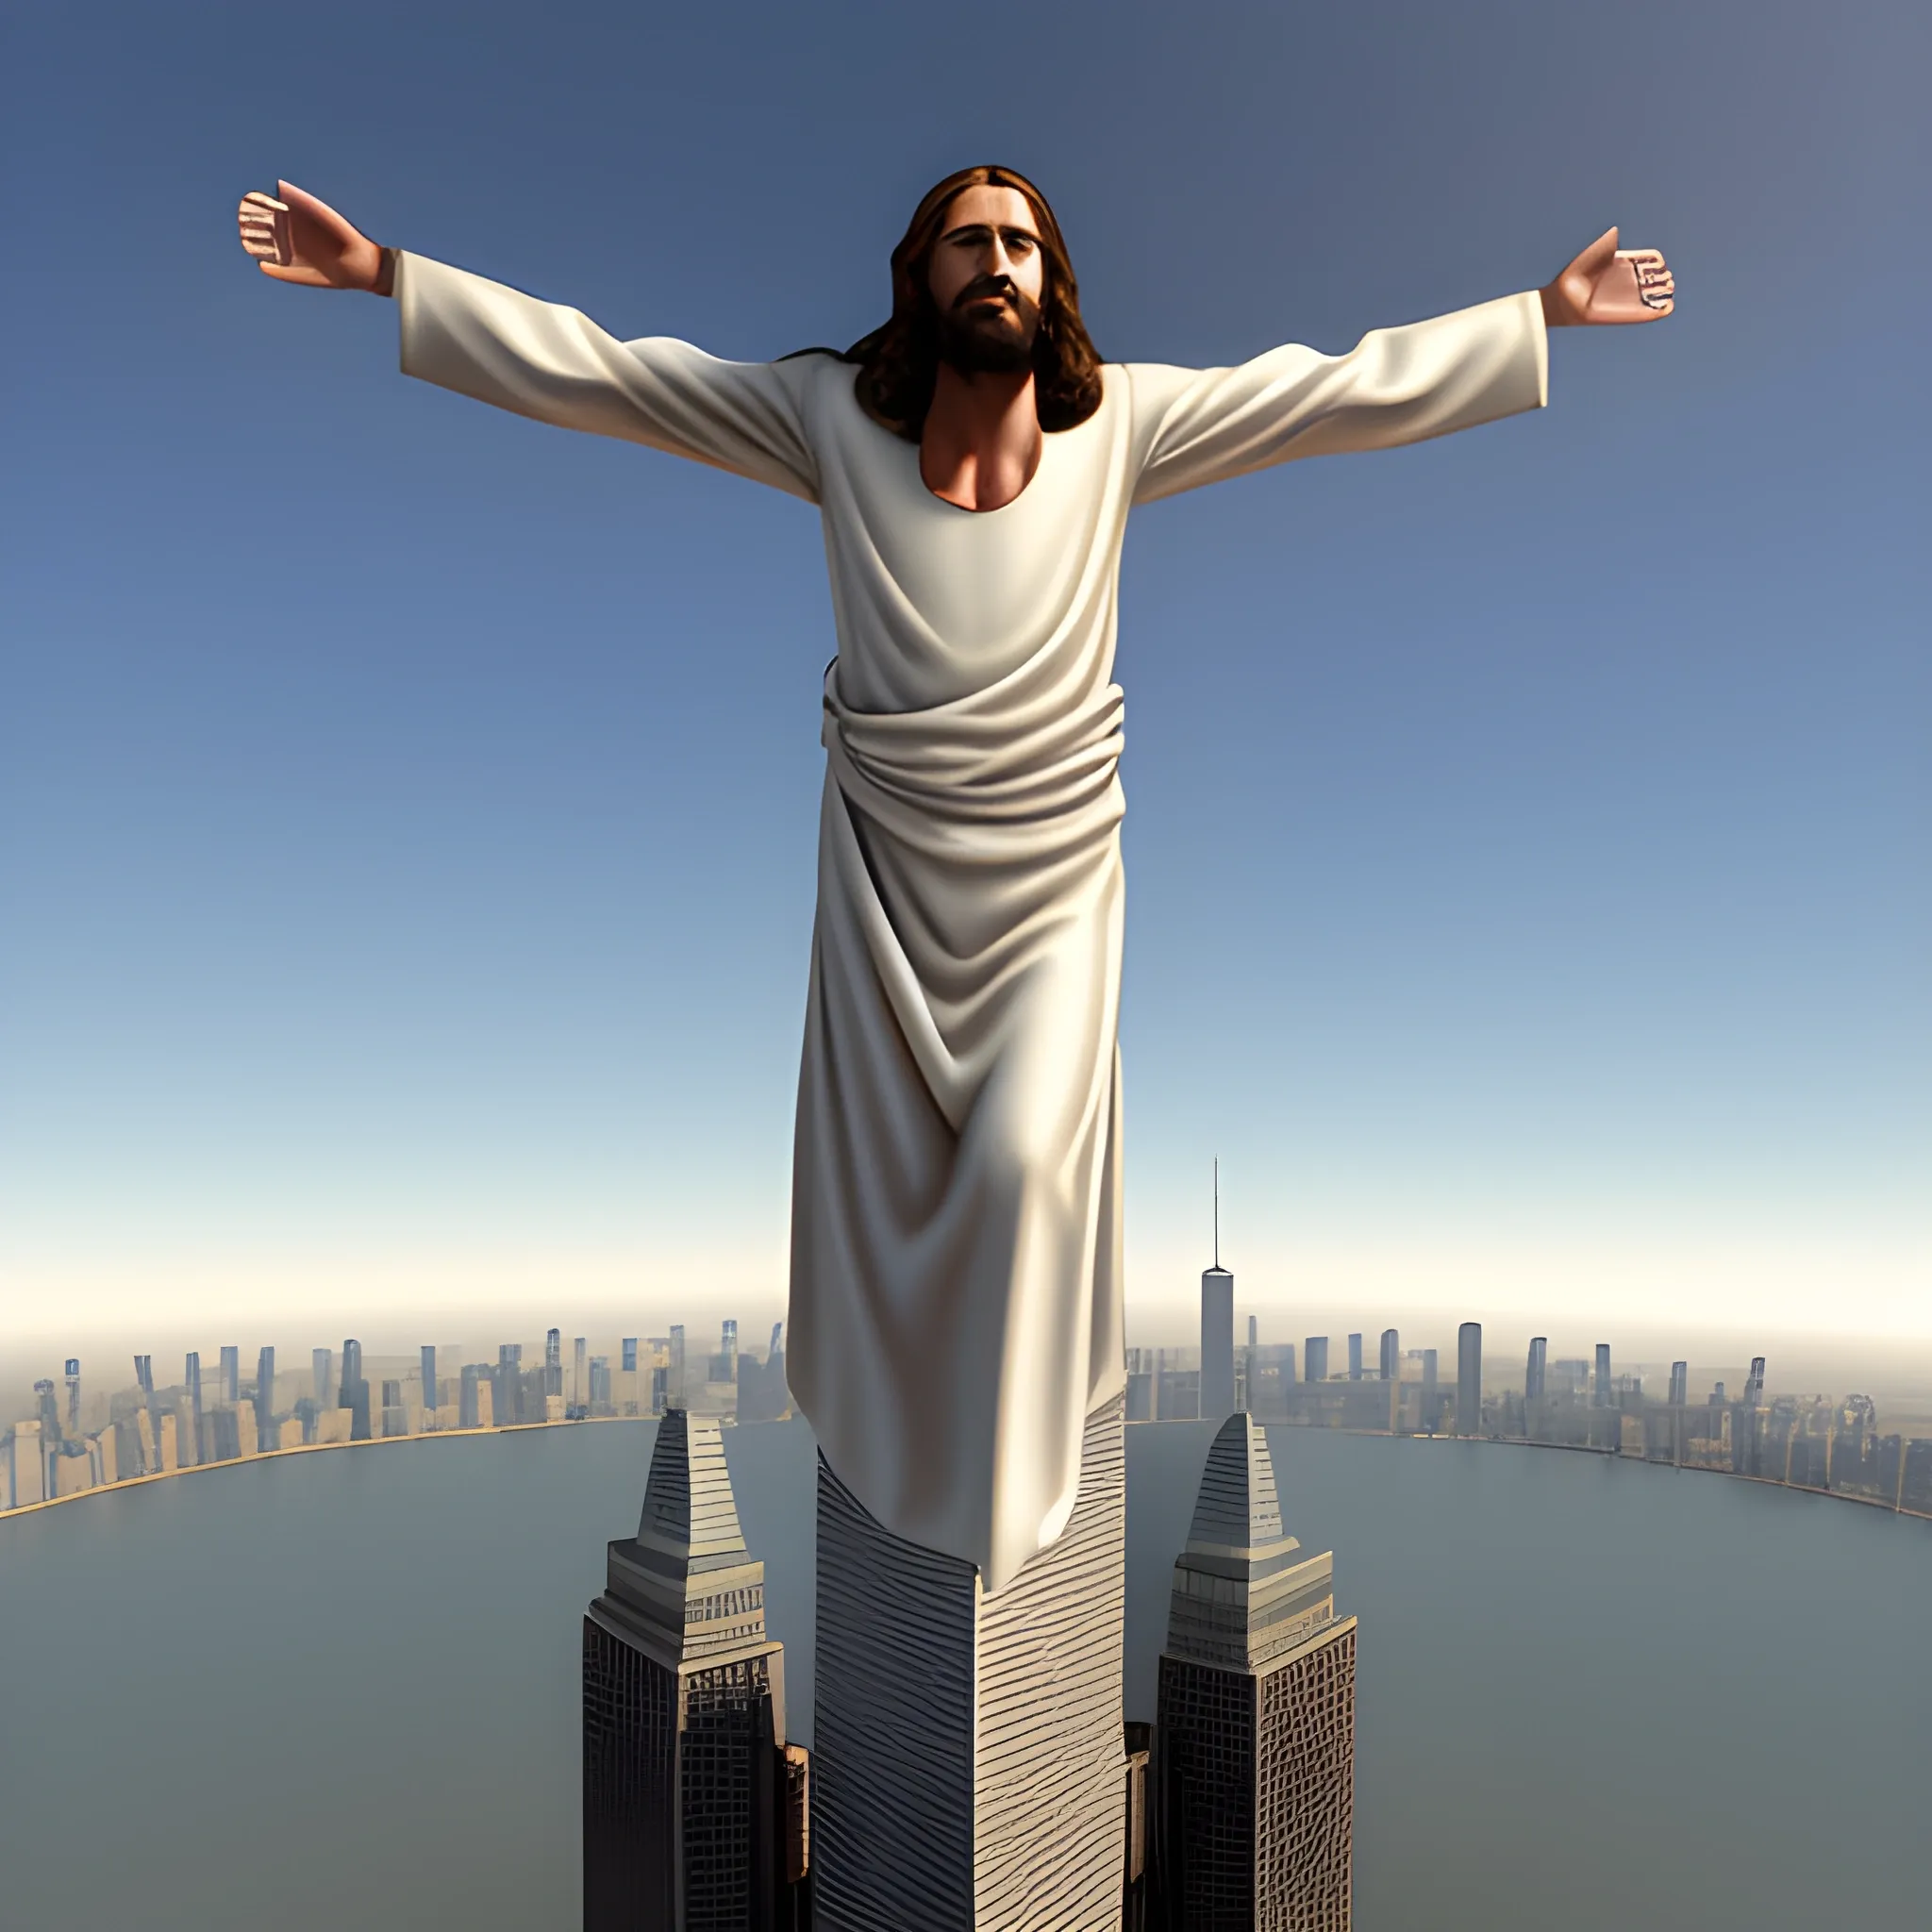 jesus flying into the world trade center
, 3D